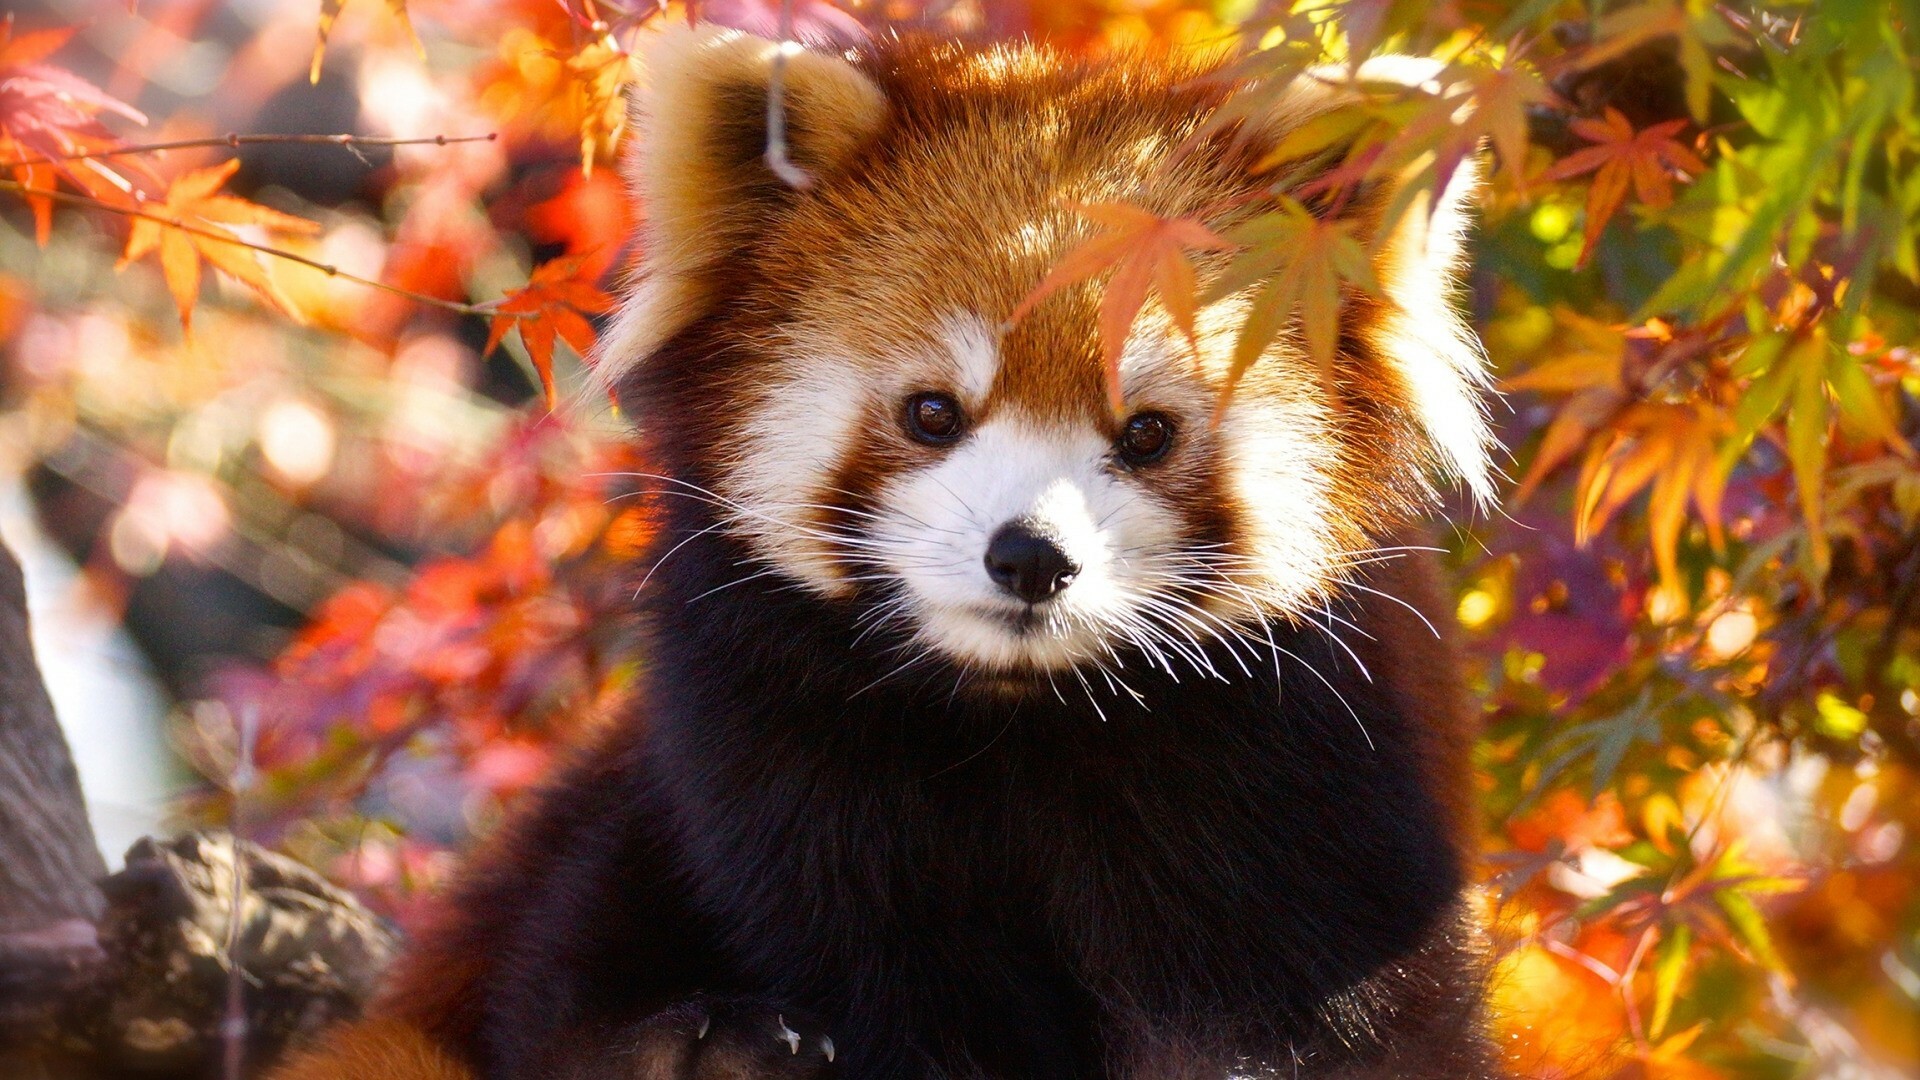 Panda: Small mammals with long, fluffy tails and red and white markings. 1920x1080 Full HD Background.